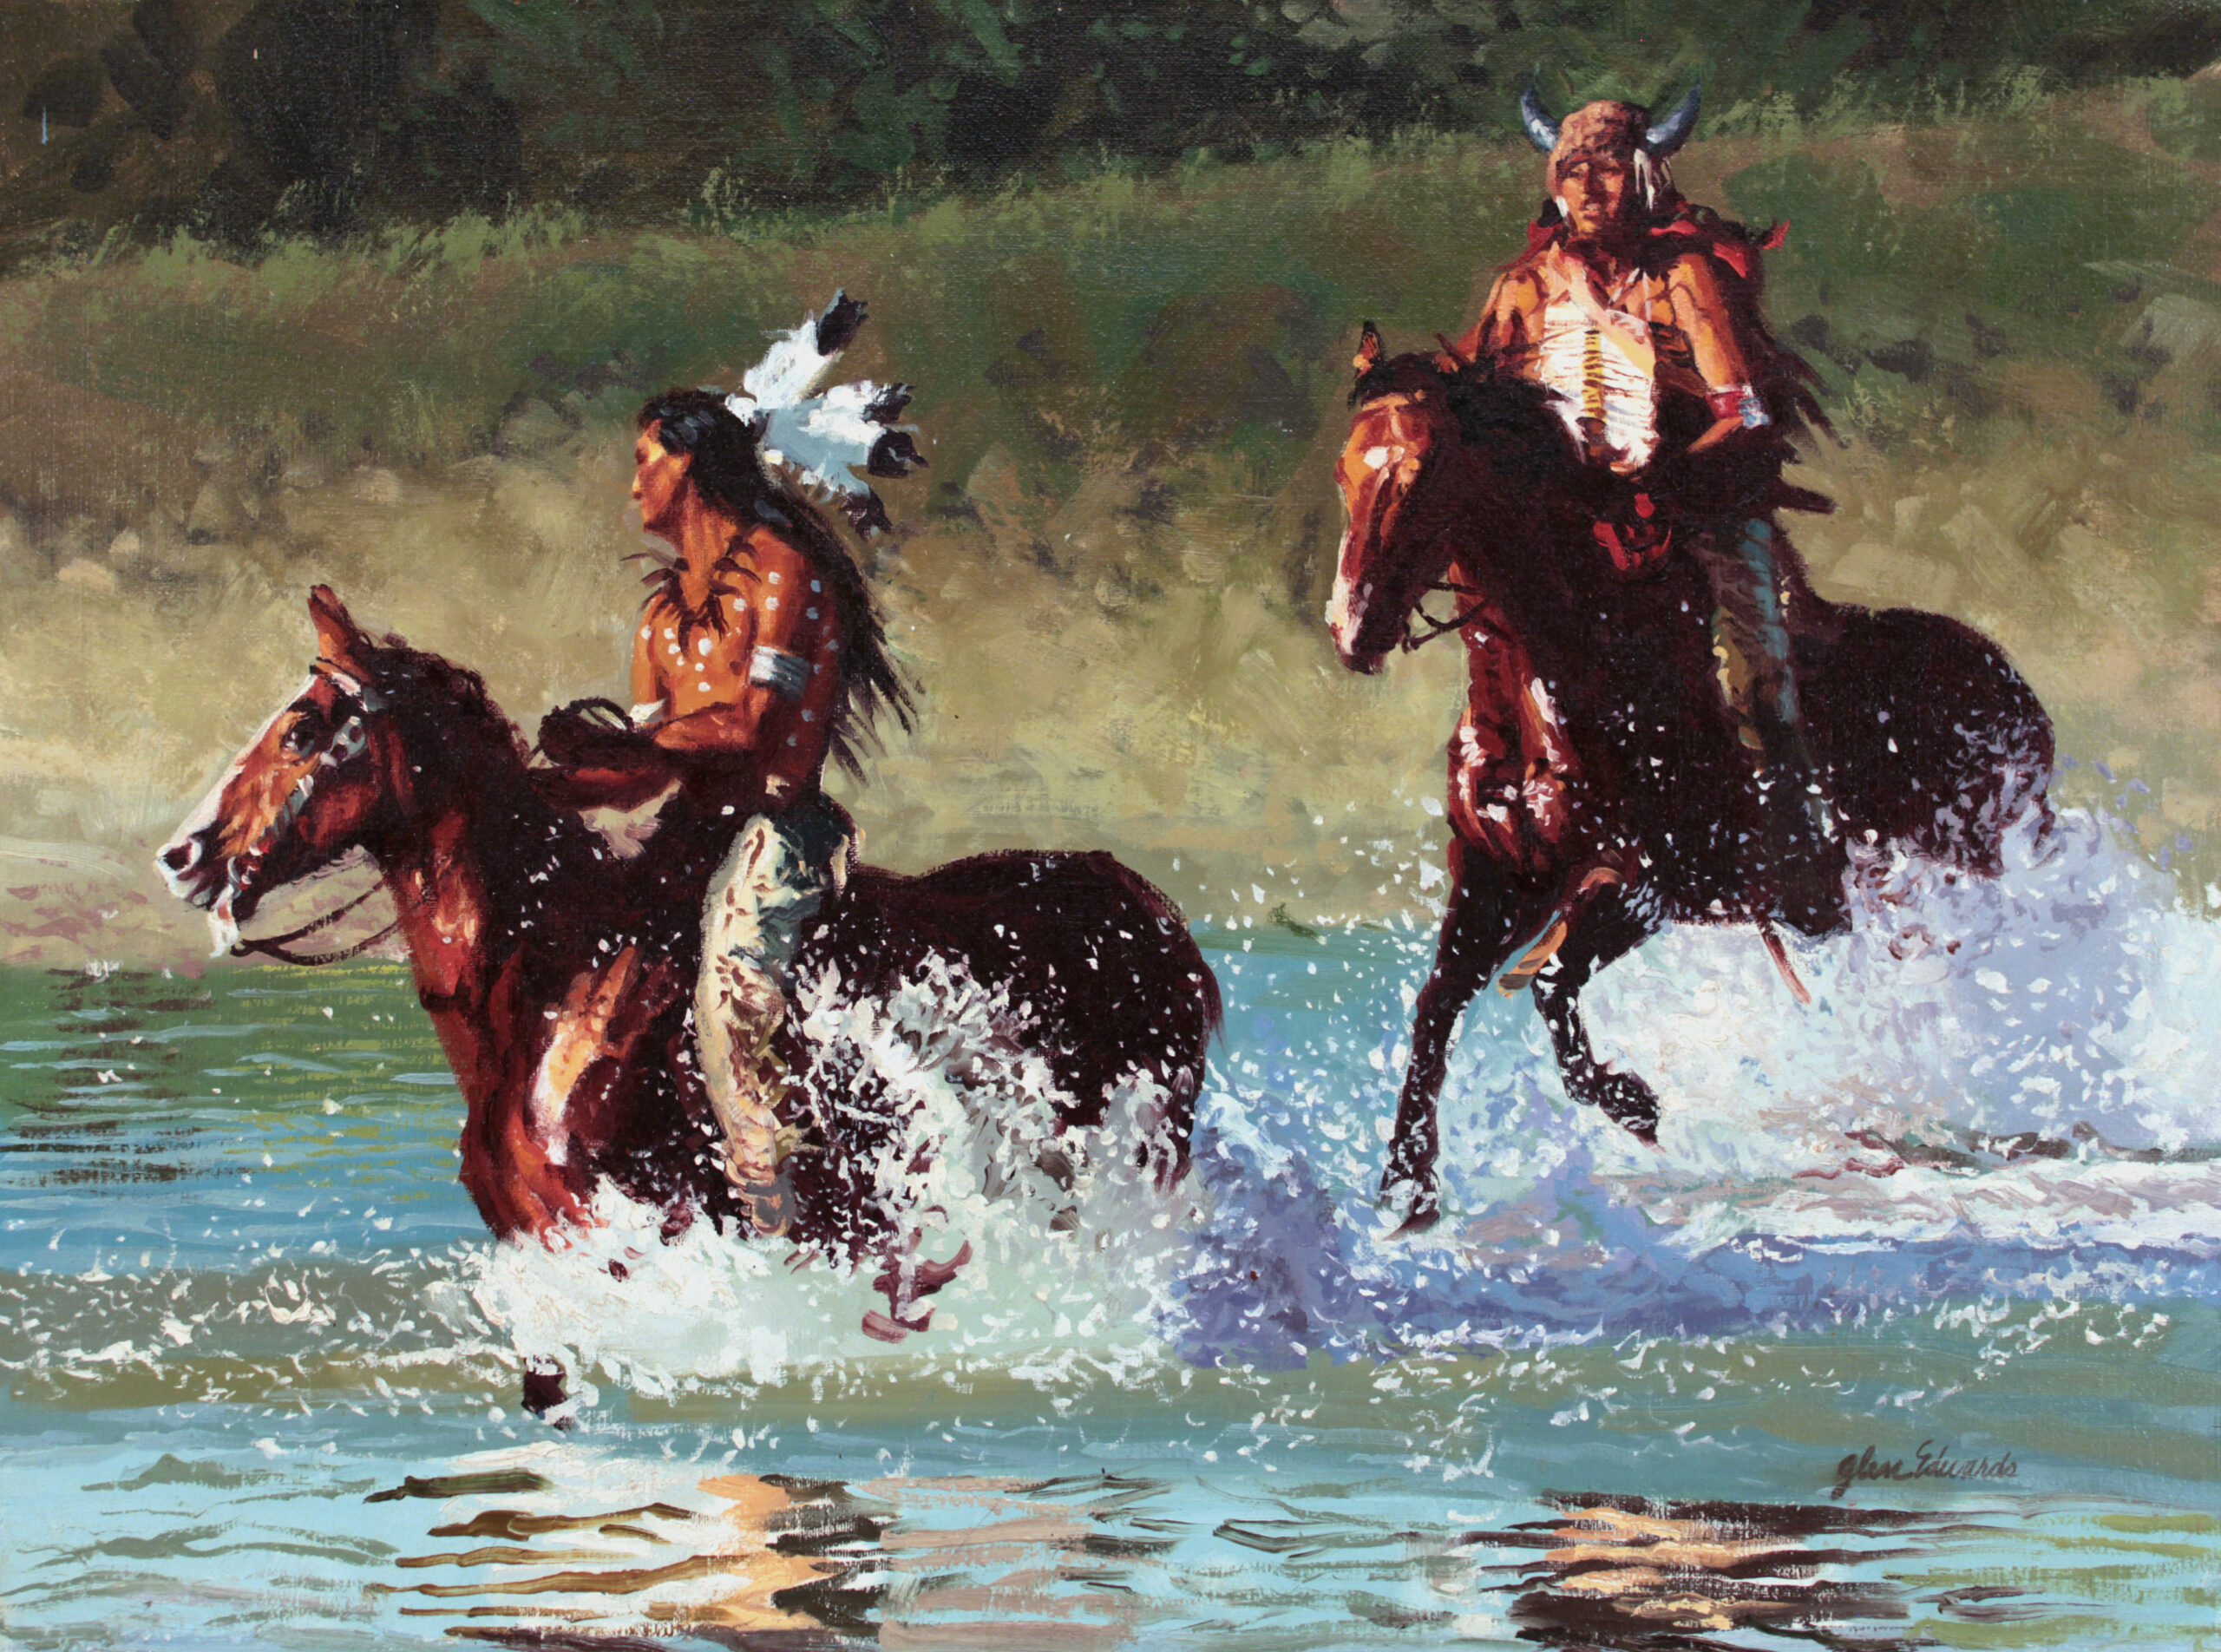 painting of two native american indians on horseback crossing a river